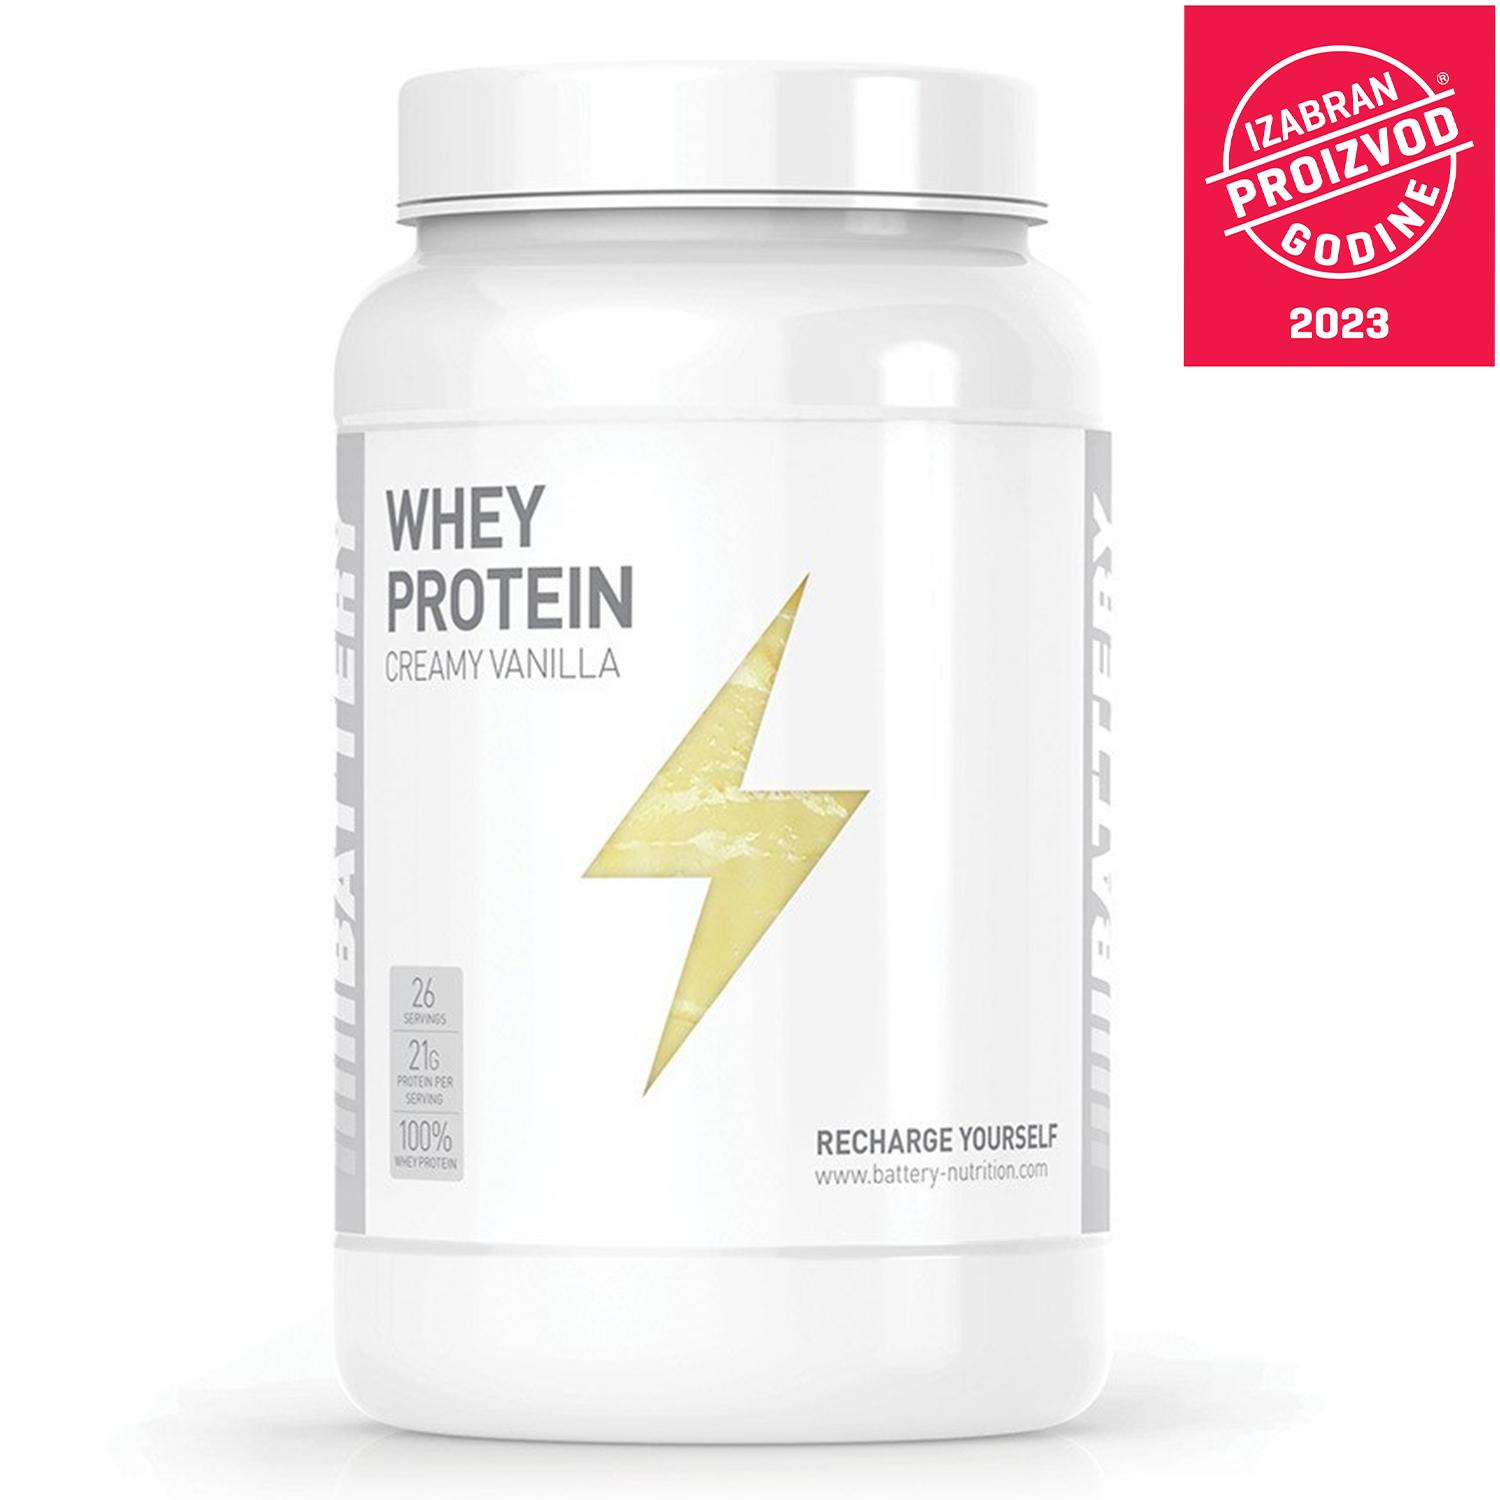 Selected image for BATTERY Whey protein 800 g vanila